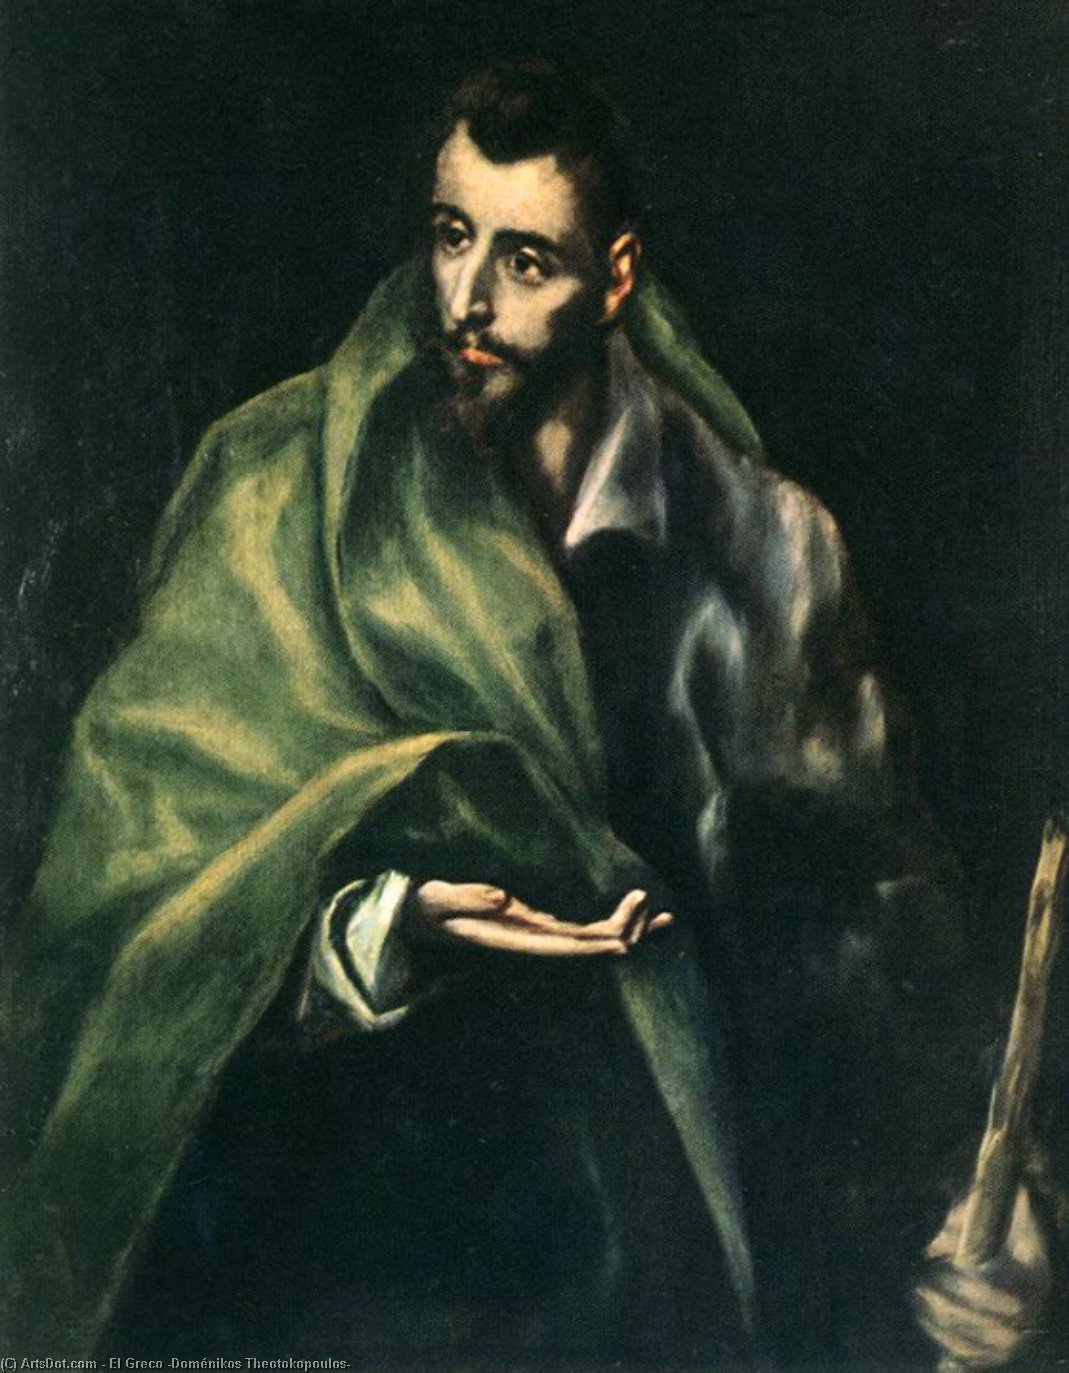 WikiOO.org - 백과 사전 - 회화, 삽화 El Greco (Doménikos Theotokopoulos) - Apostle St James the Greater